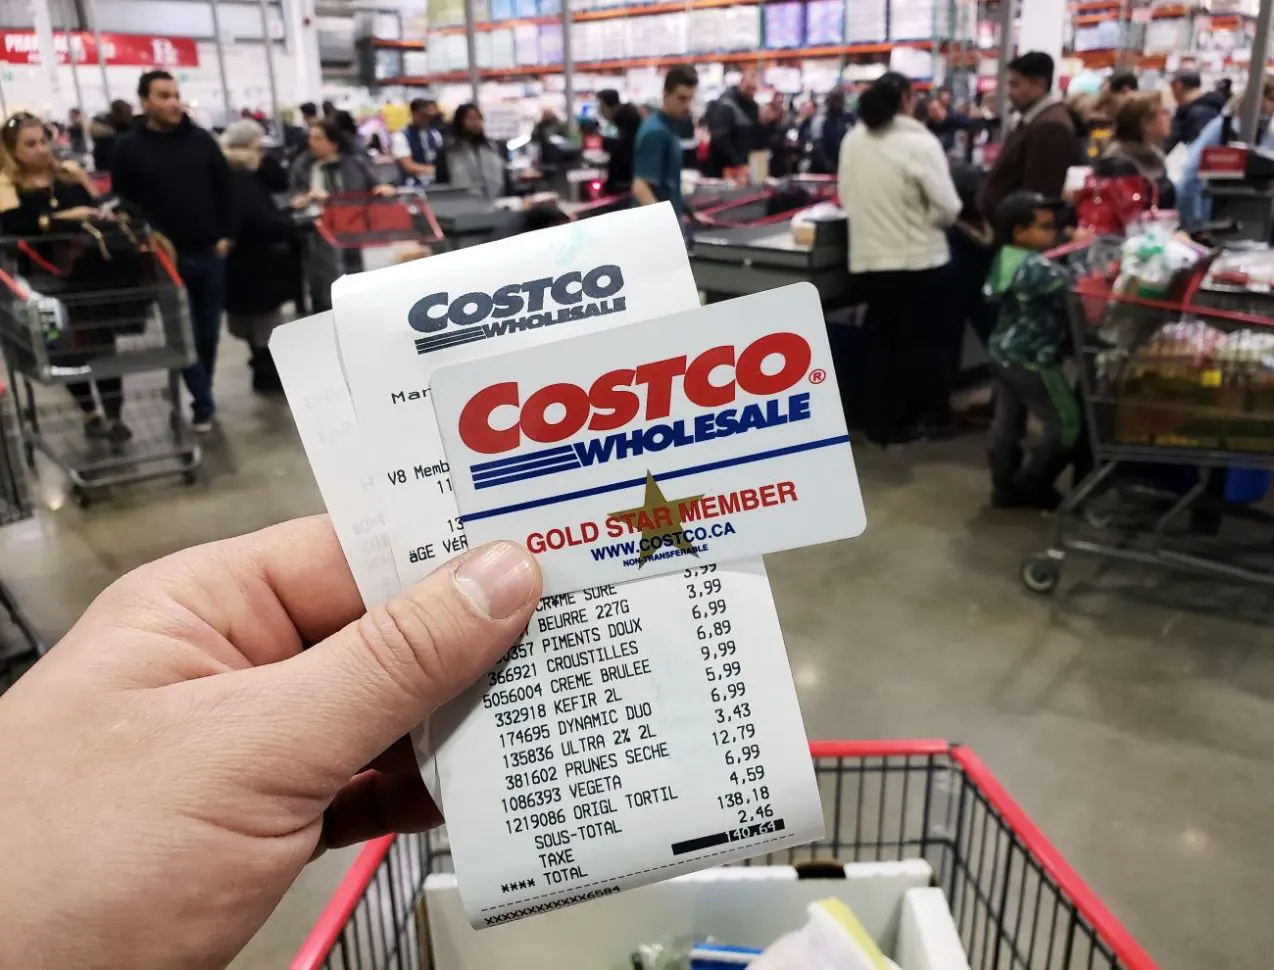 TikToker Cracks Secret Costco Pricing Code: 'Never Miss a Great Deal Again'. Watch the Video.